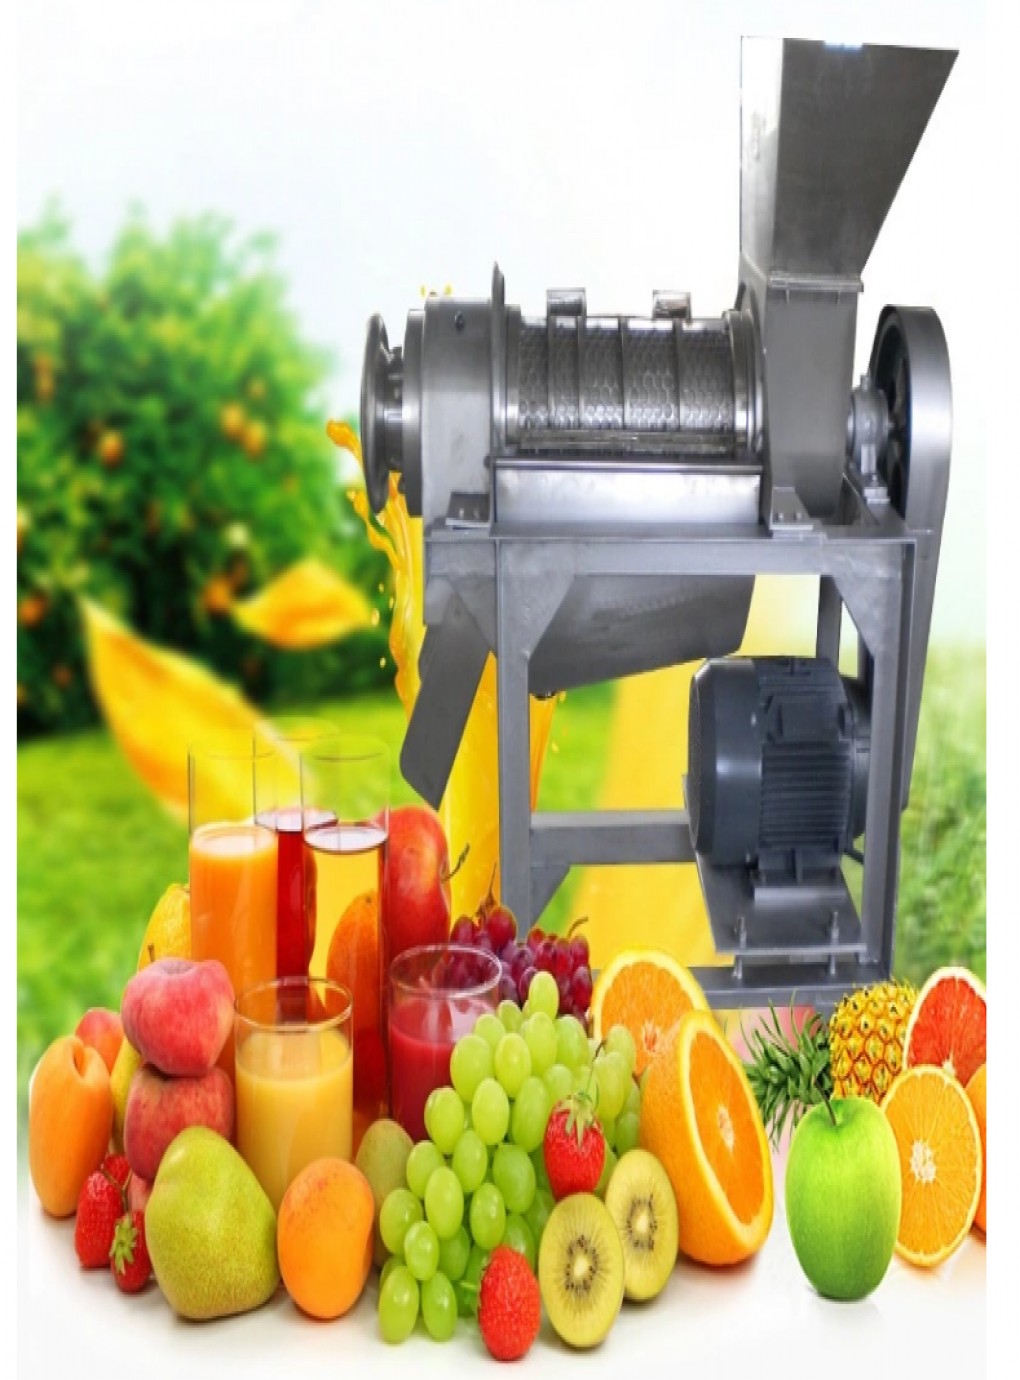 Automatic juicer machine for Small Business